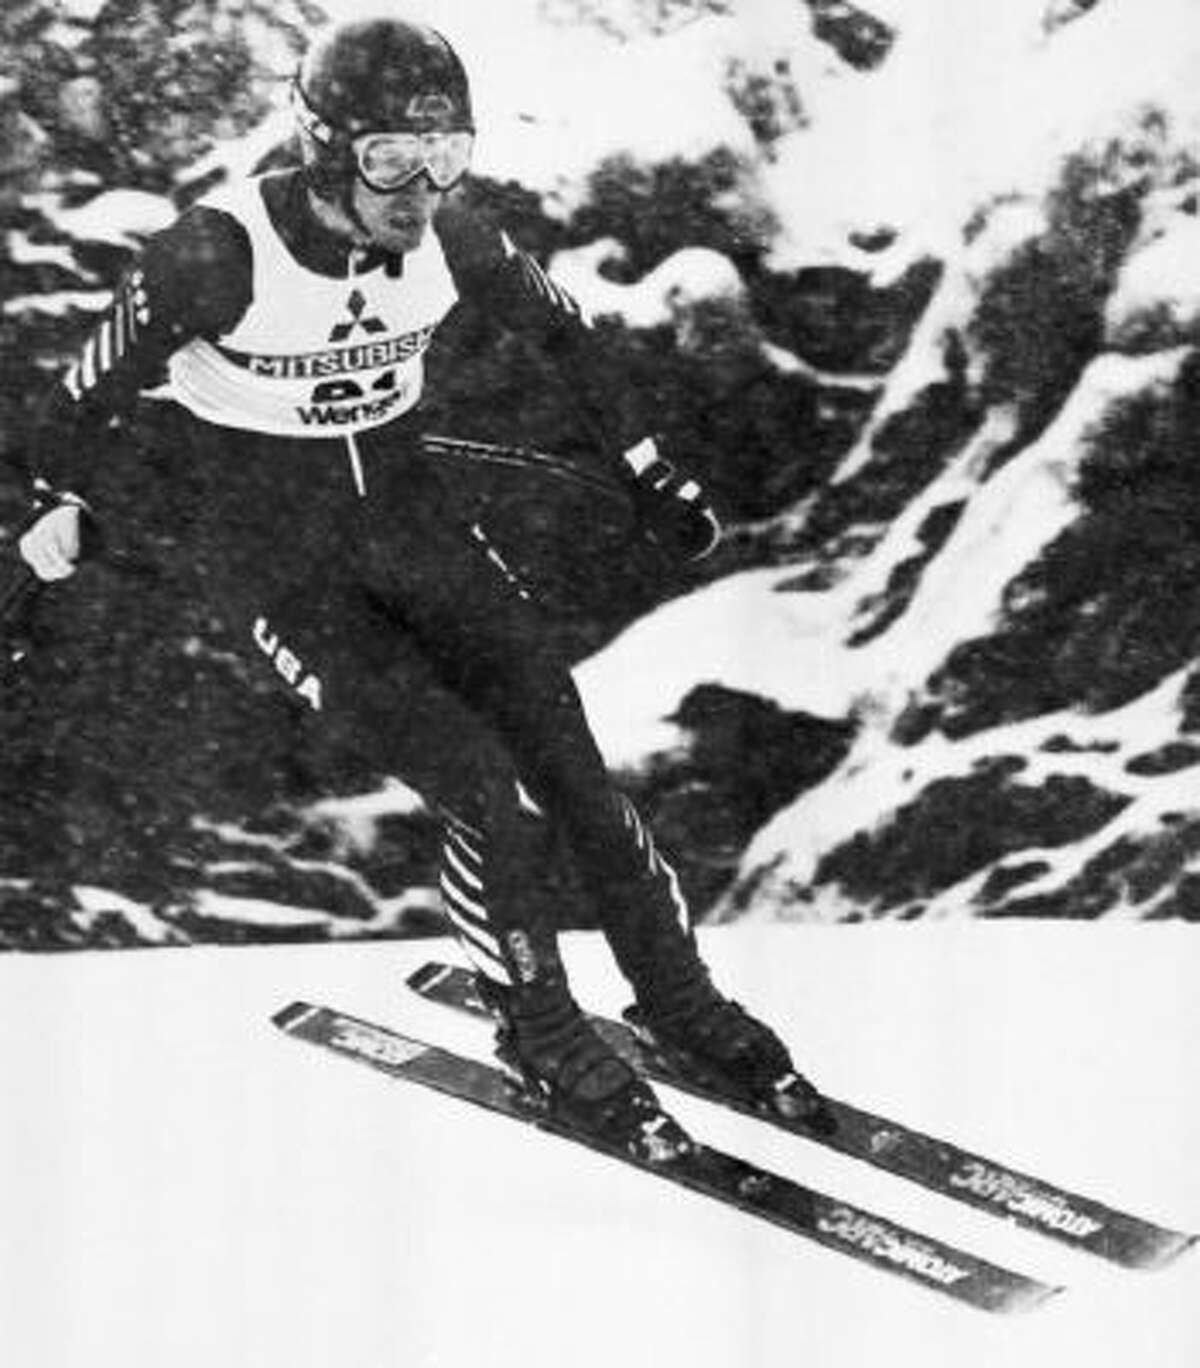 In this Sunday, Jan. 15, 1984 file photo, Bill Johnson of Van Nuys, Calif. makes his way down the Lauberhorn course in the World Cup Mens Downhill Race, Wengen, Switzerland.